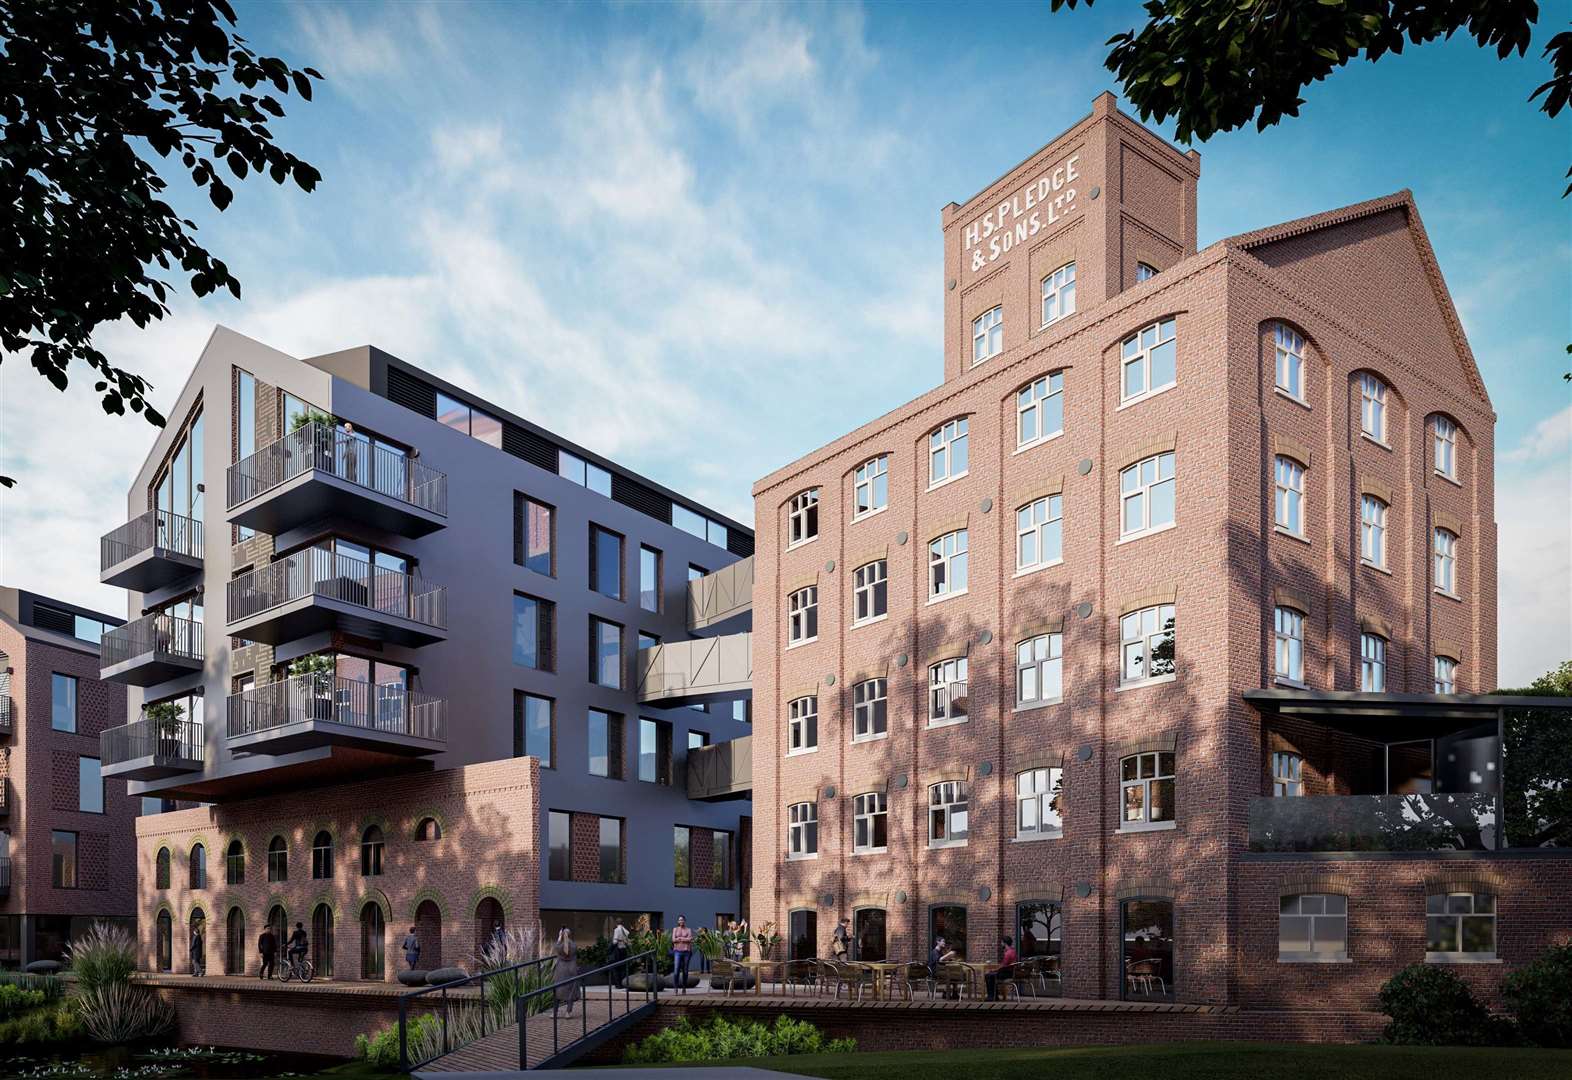 Striking images show how landmark mill could look as flats